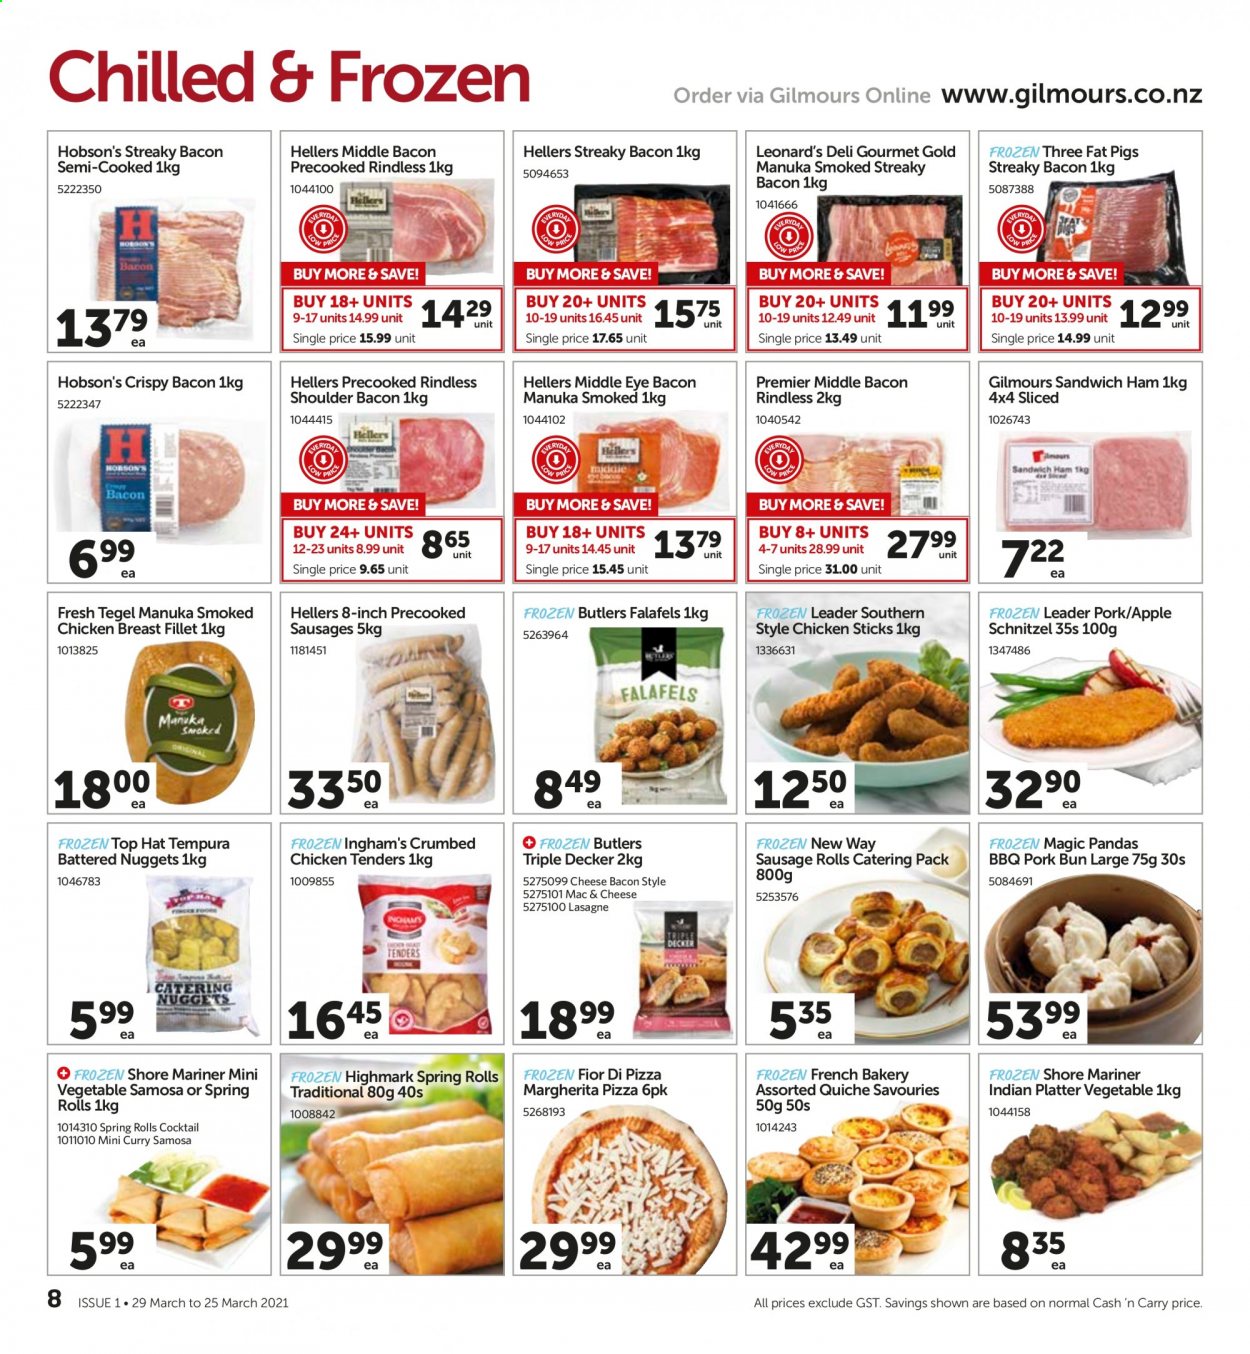 thumbnail - Gilmours mailer - 29.03.2021 - 25.04.2021 - Sales products - sausage rolls, Shore Mariner, macaroni & cheese, pizza, sandwich, nuggets, spring rolls, schnitzel, bacon, ham, shoulder bacon, streaky bacon, sausage, quiche, lasagne sheets, chicken tenders, chicken breasts. Page 8.